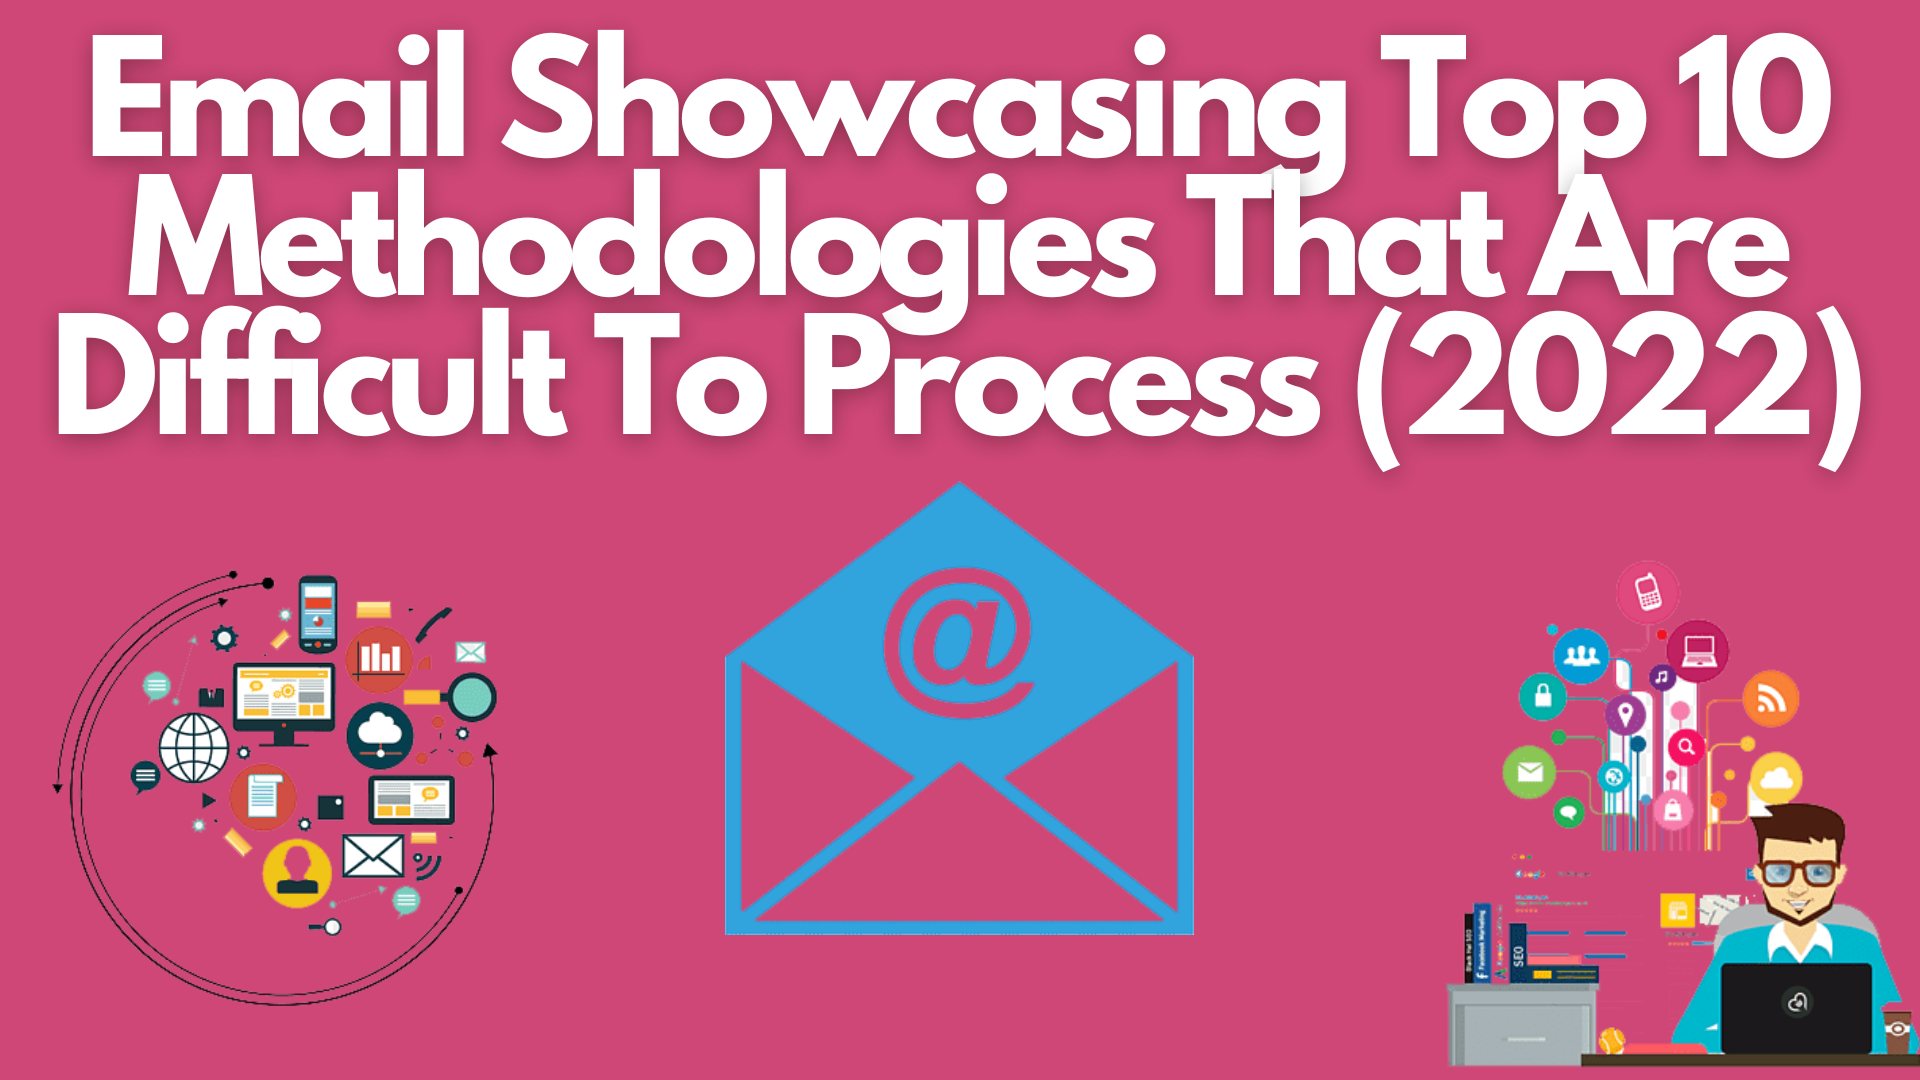 Email showcasing top 10 methodologies that are difficult to process (2022)